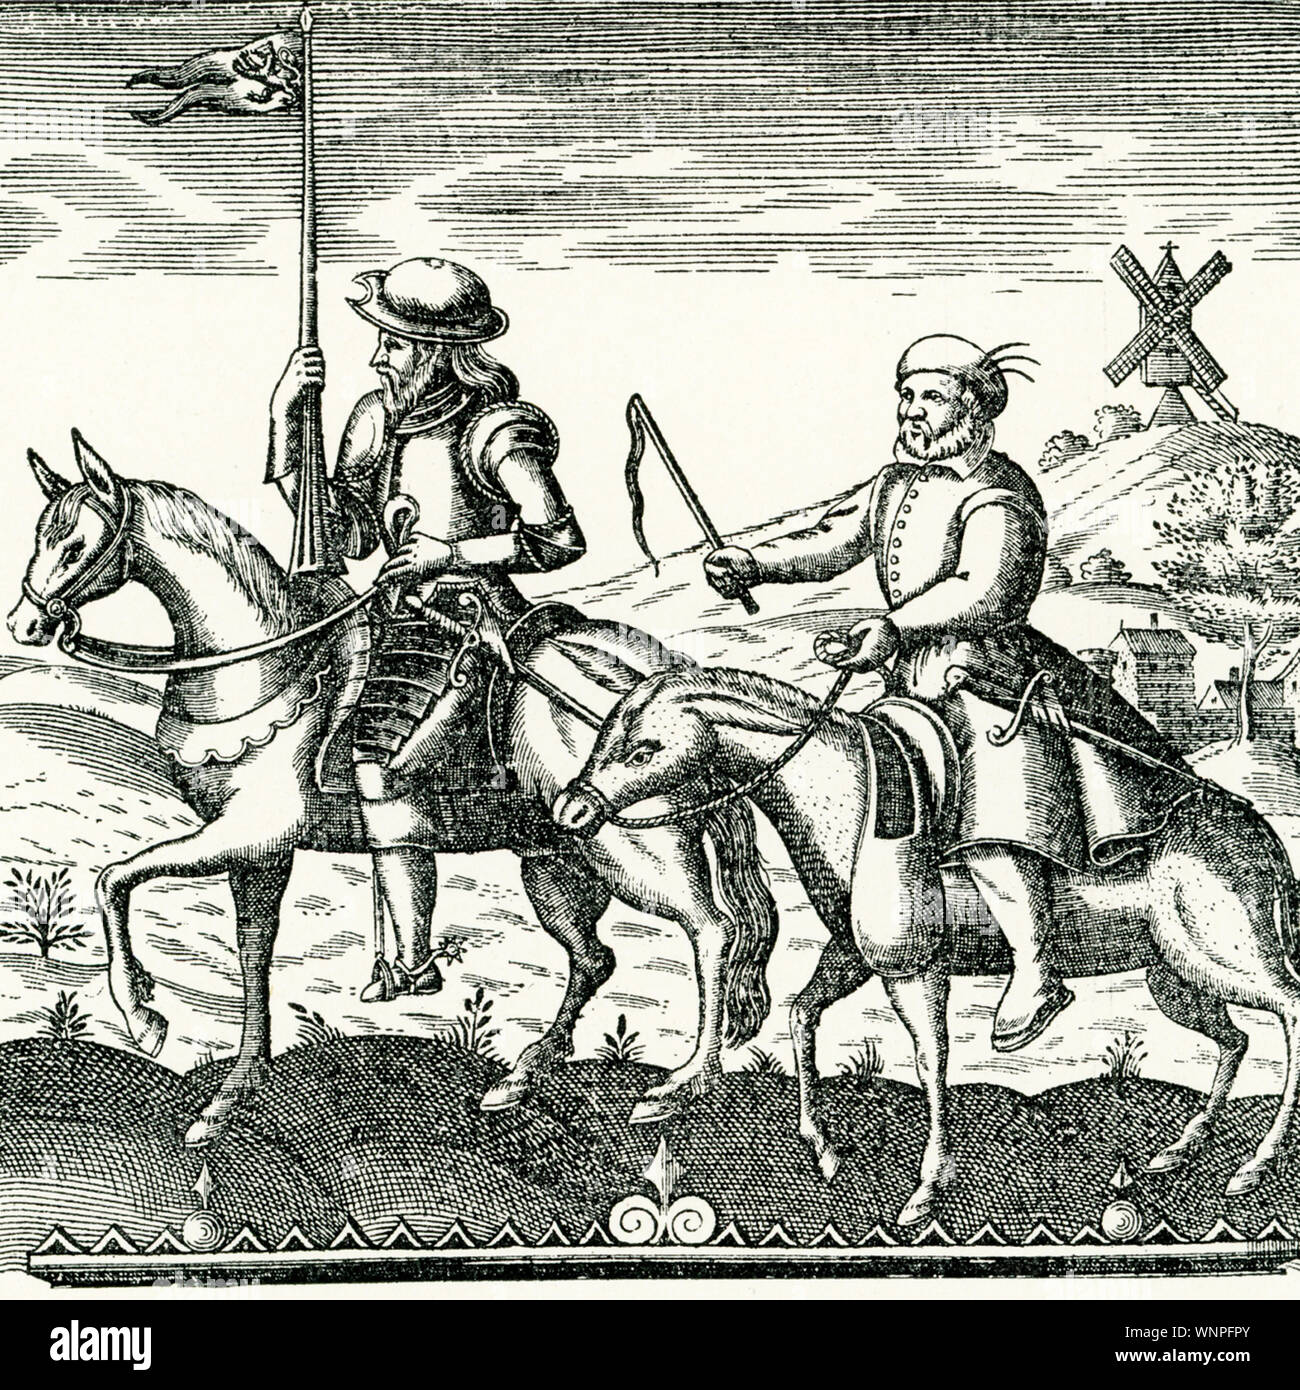 This illustration shows Don Quixote (left) and Sancho Panza. It is the title page from the first Cervantes edition. Don Quixote is a middle-aged gentleman from the region of La Mancha in central Spain, who is obsessed with the chivalrous ideals praised in books he has read. After a first failed adventure, he sets out on a second one with a somewhat befuddled laborer named Sancho Panza, whom he has persuaded to accompany him as his faithful squire. The novel was published in 1605 by Spanish writer Miguel de Cervantes. Stock Photo